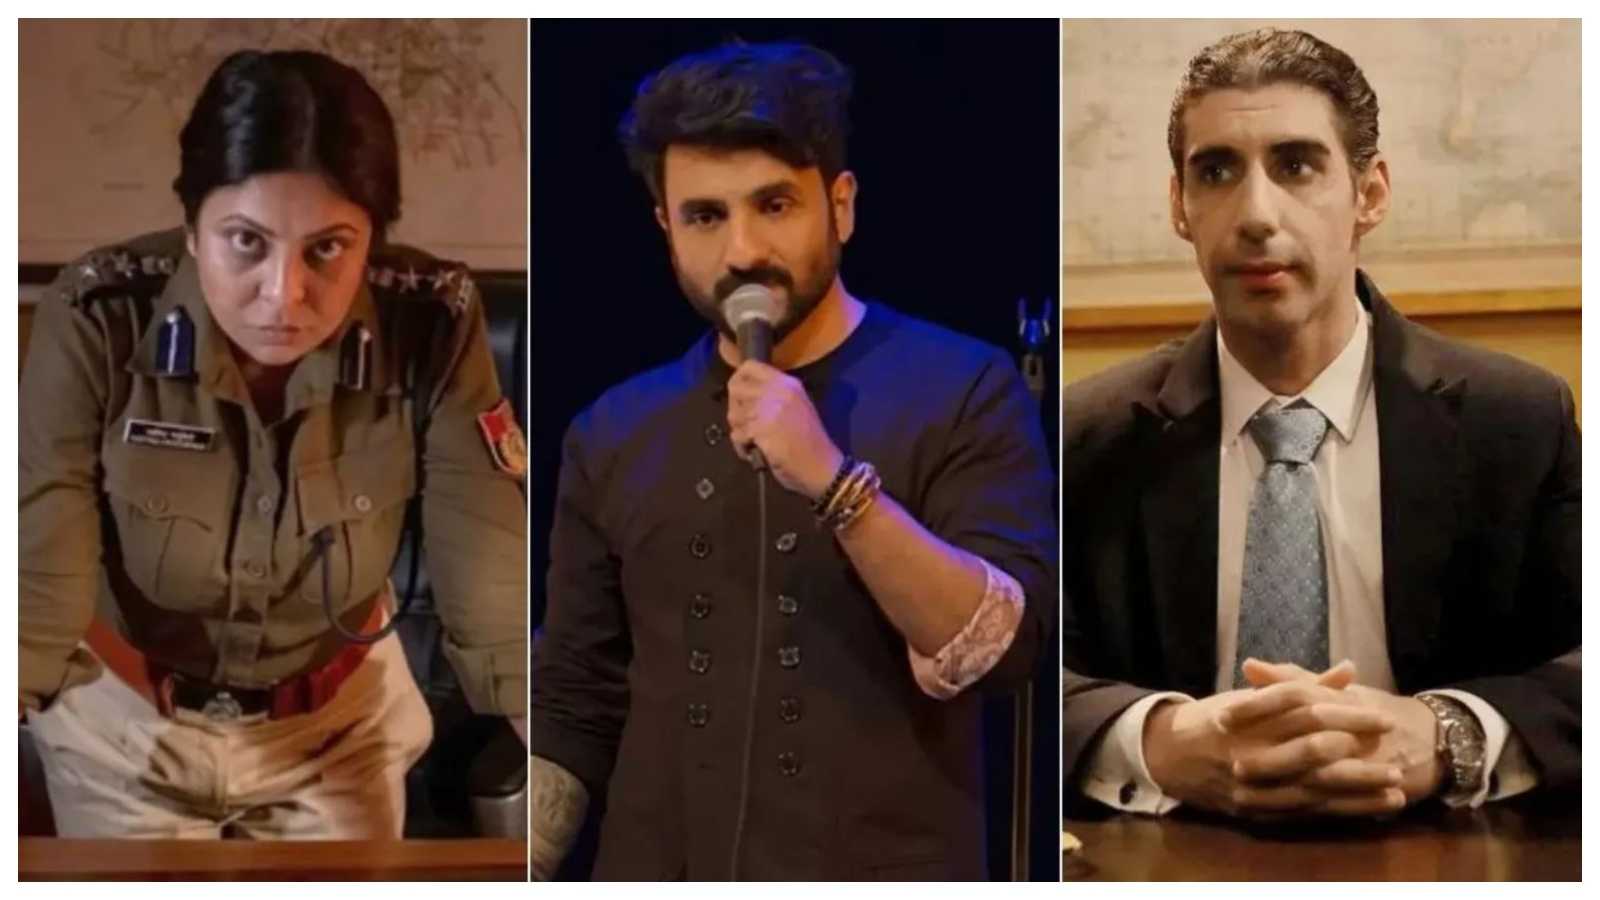 International Emmy Awards 2023: Shefali Shah, Jim Sarbh and Vir Das reveal their first reaction after being nominated